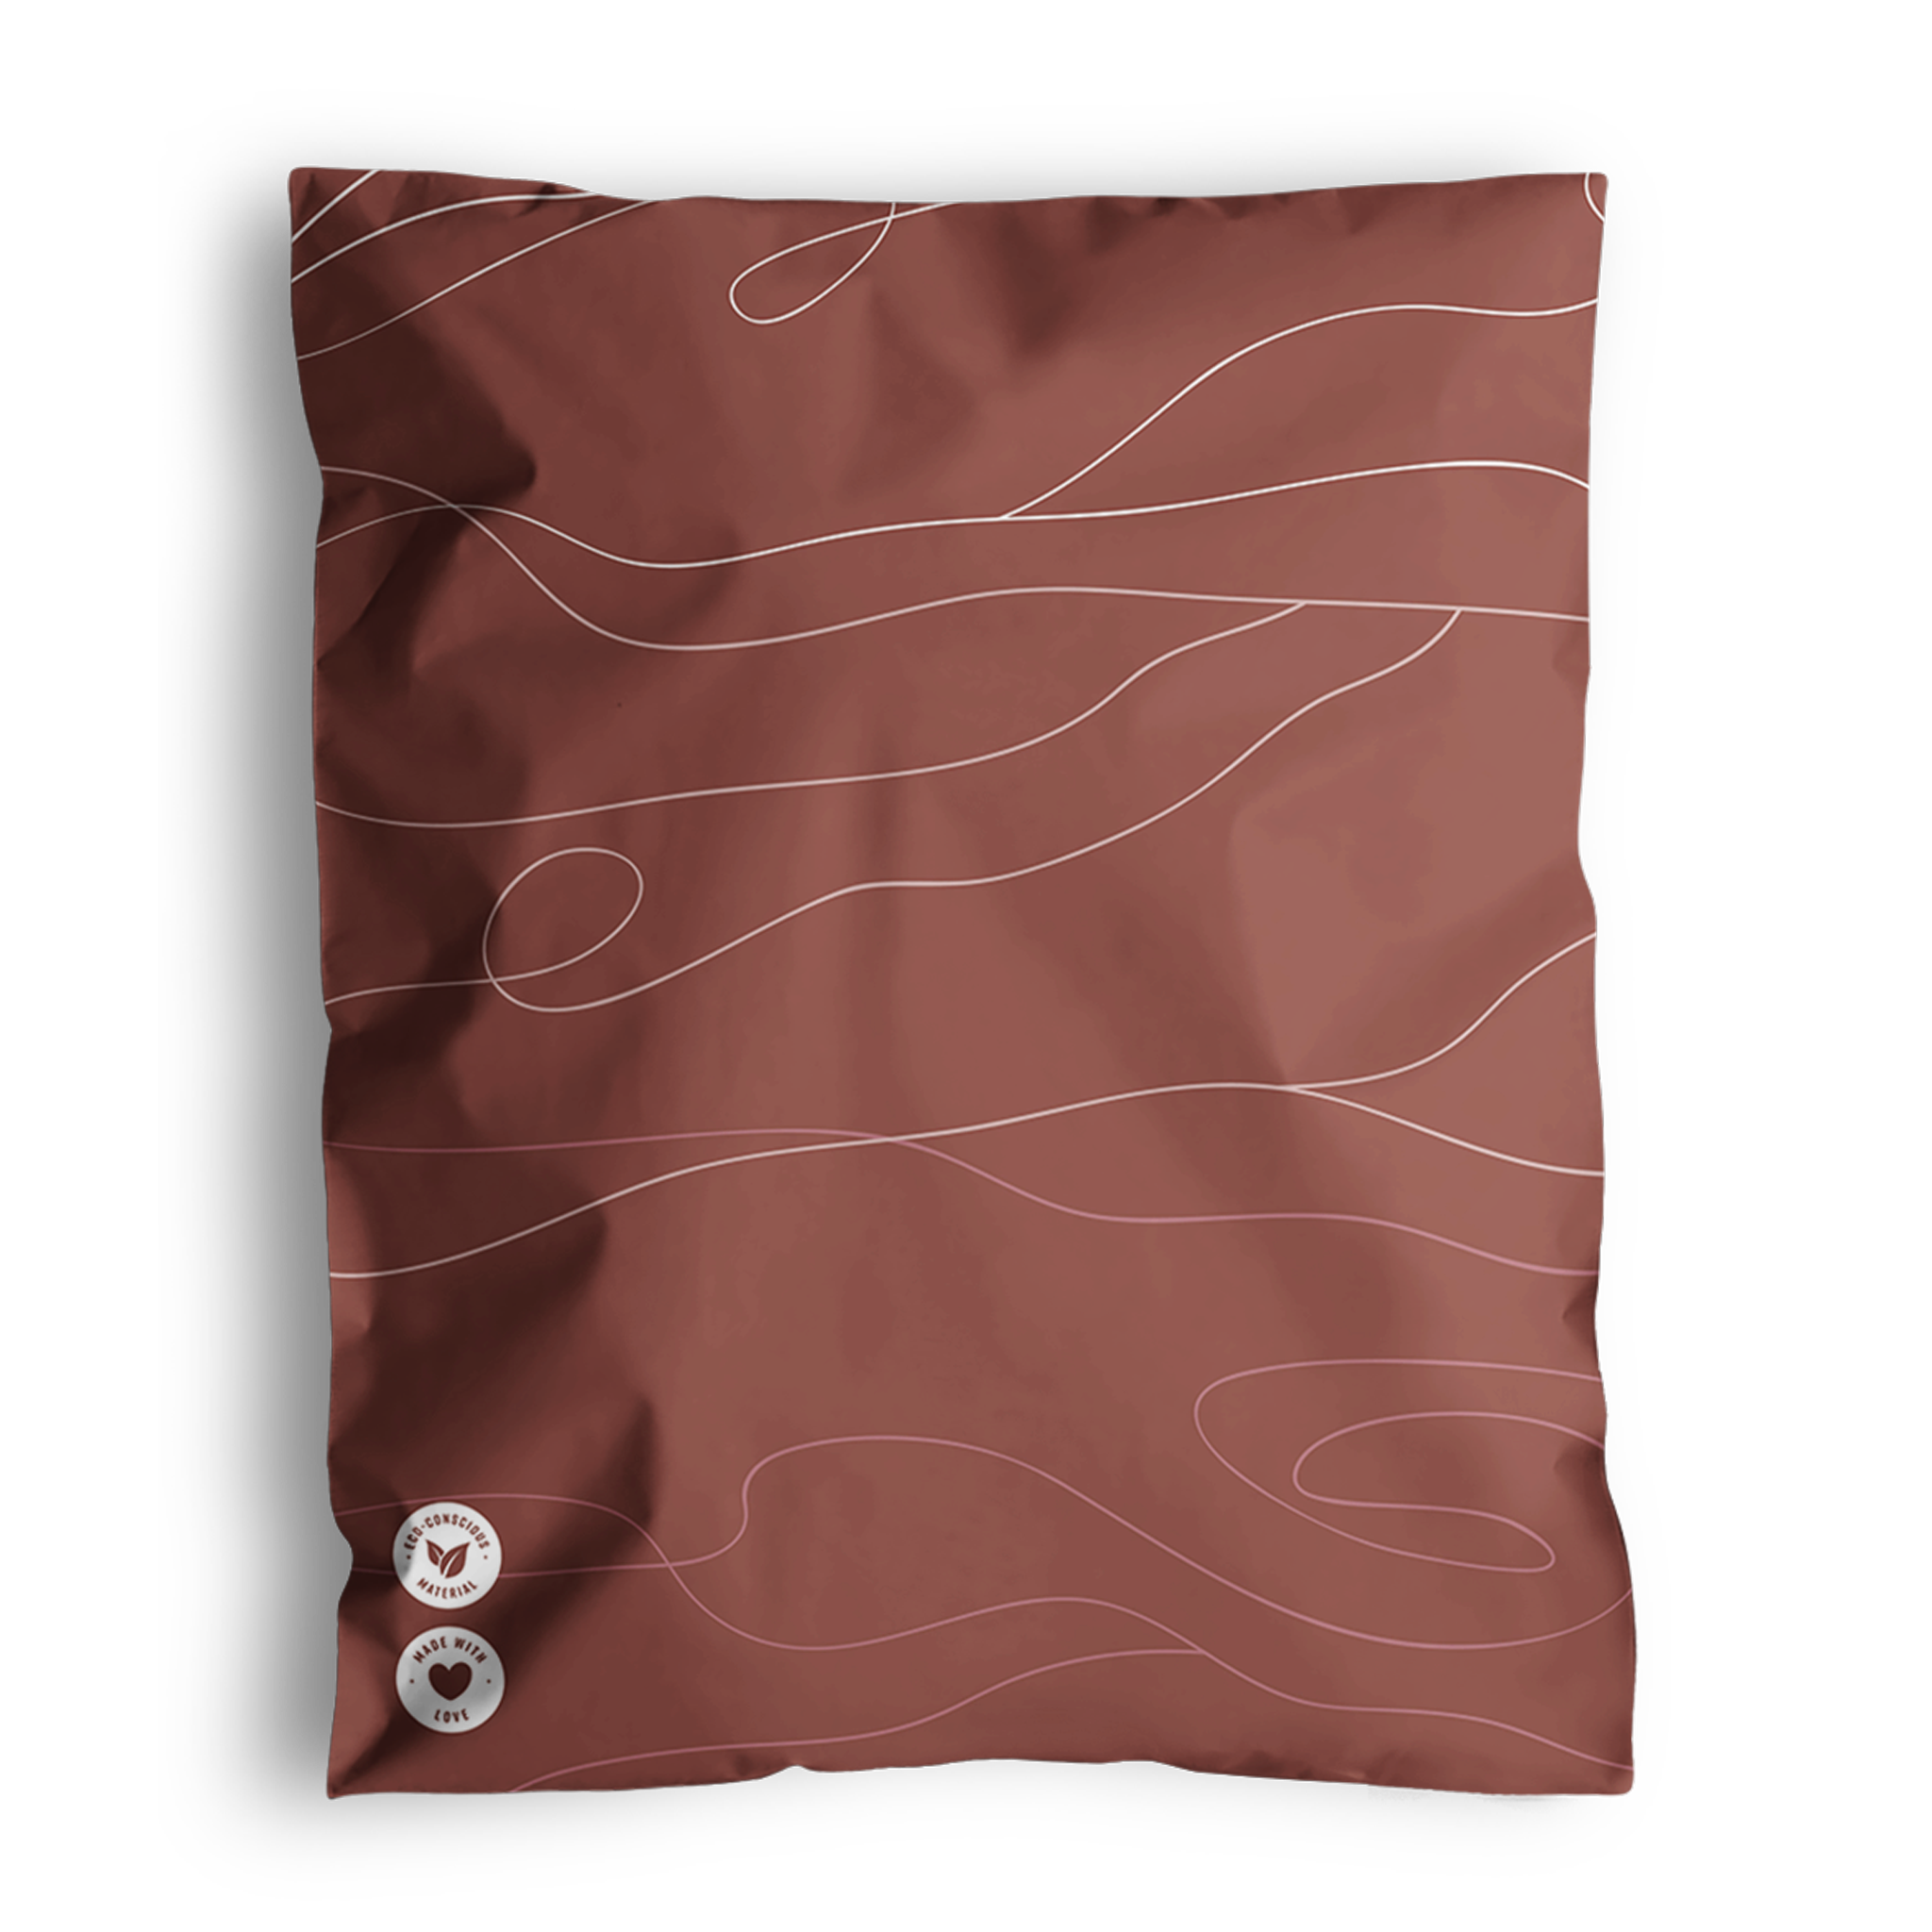 A brown pillowcase with wavy white lines and two small round patches at the bottom, reminiscent of the design on Tidal Terracotta Mailers 10" x 13" by impack.co.